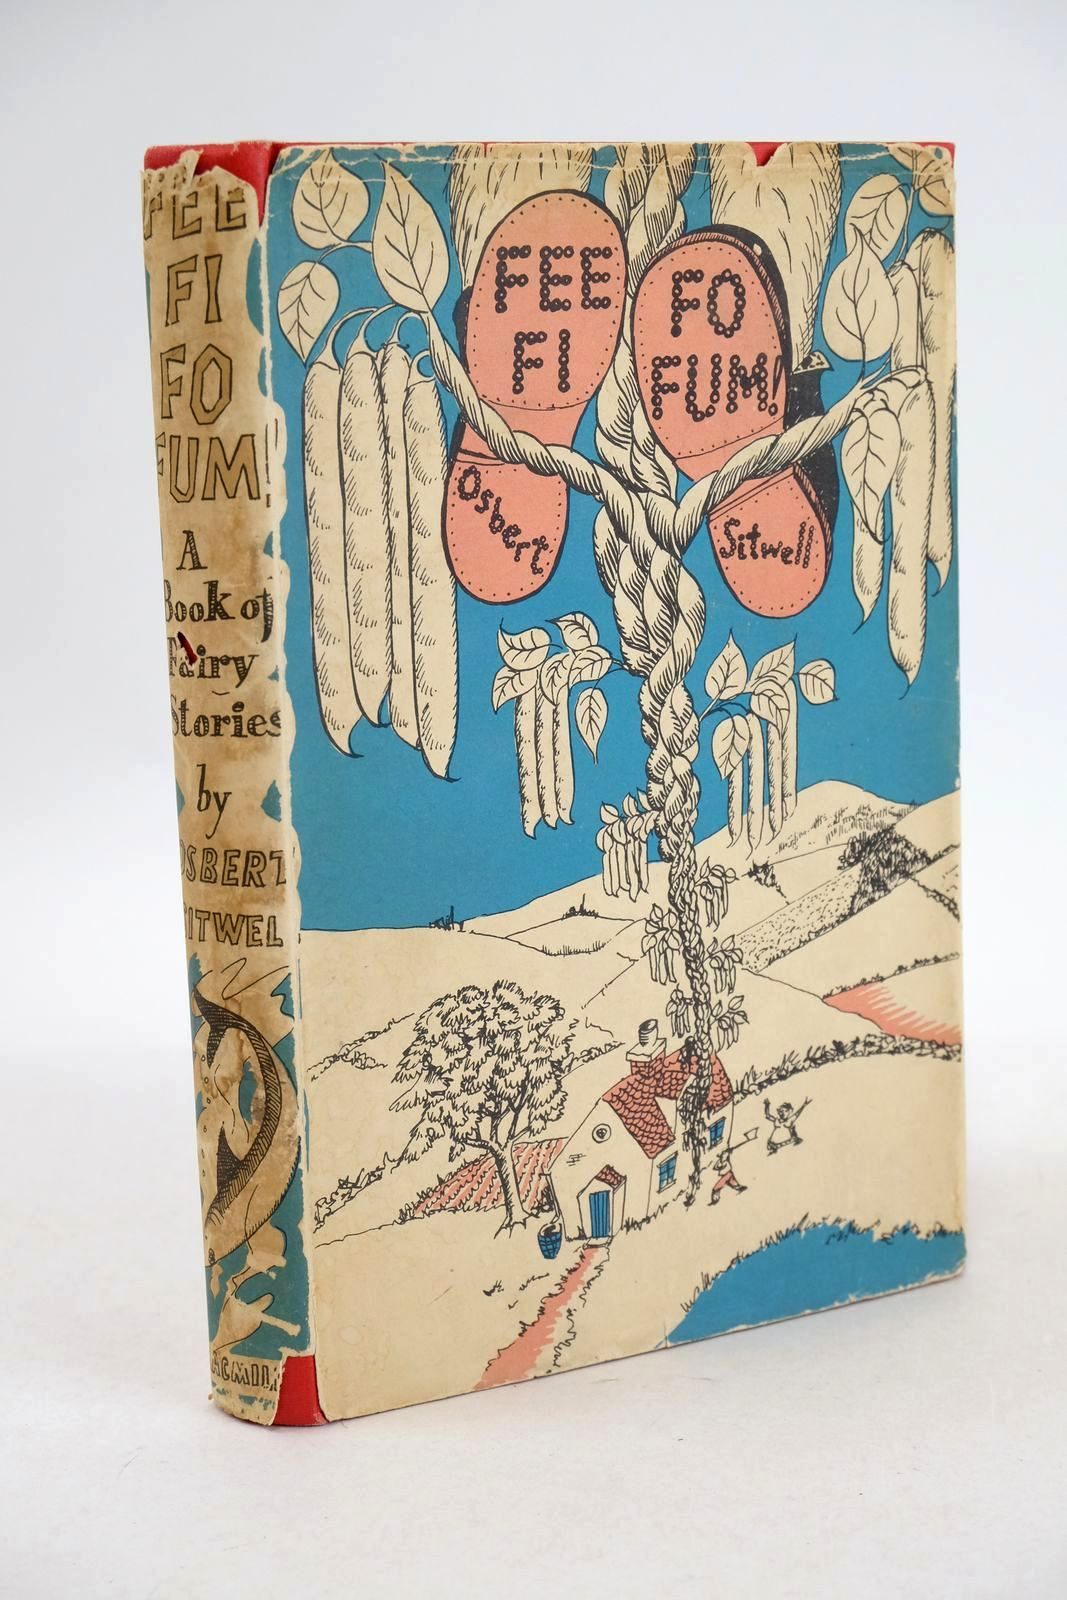 Photo of FEE FI FO FUM written by Sitwell, Osbert published by Macmillan &amp; Co. Ltd. (STOCK CODE: 1326295)  for sale by Stella & Rose's Books